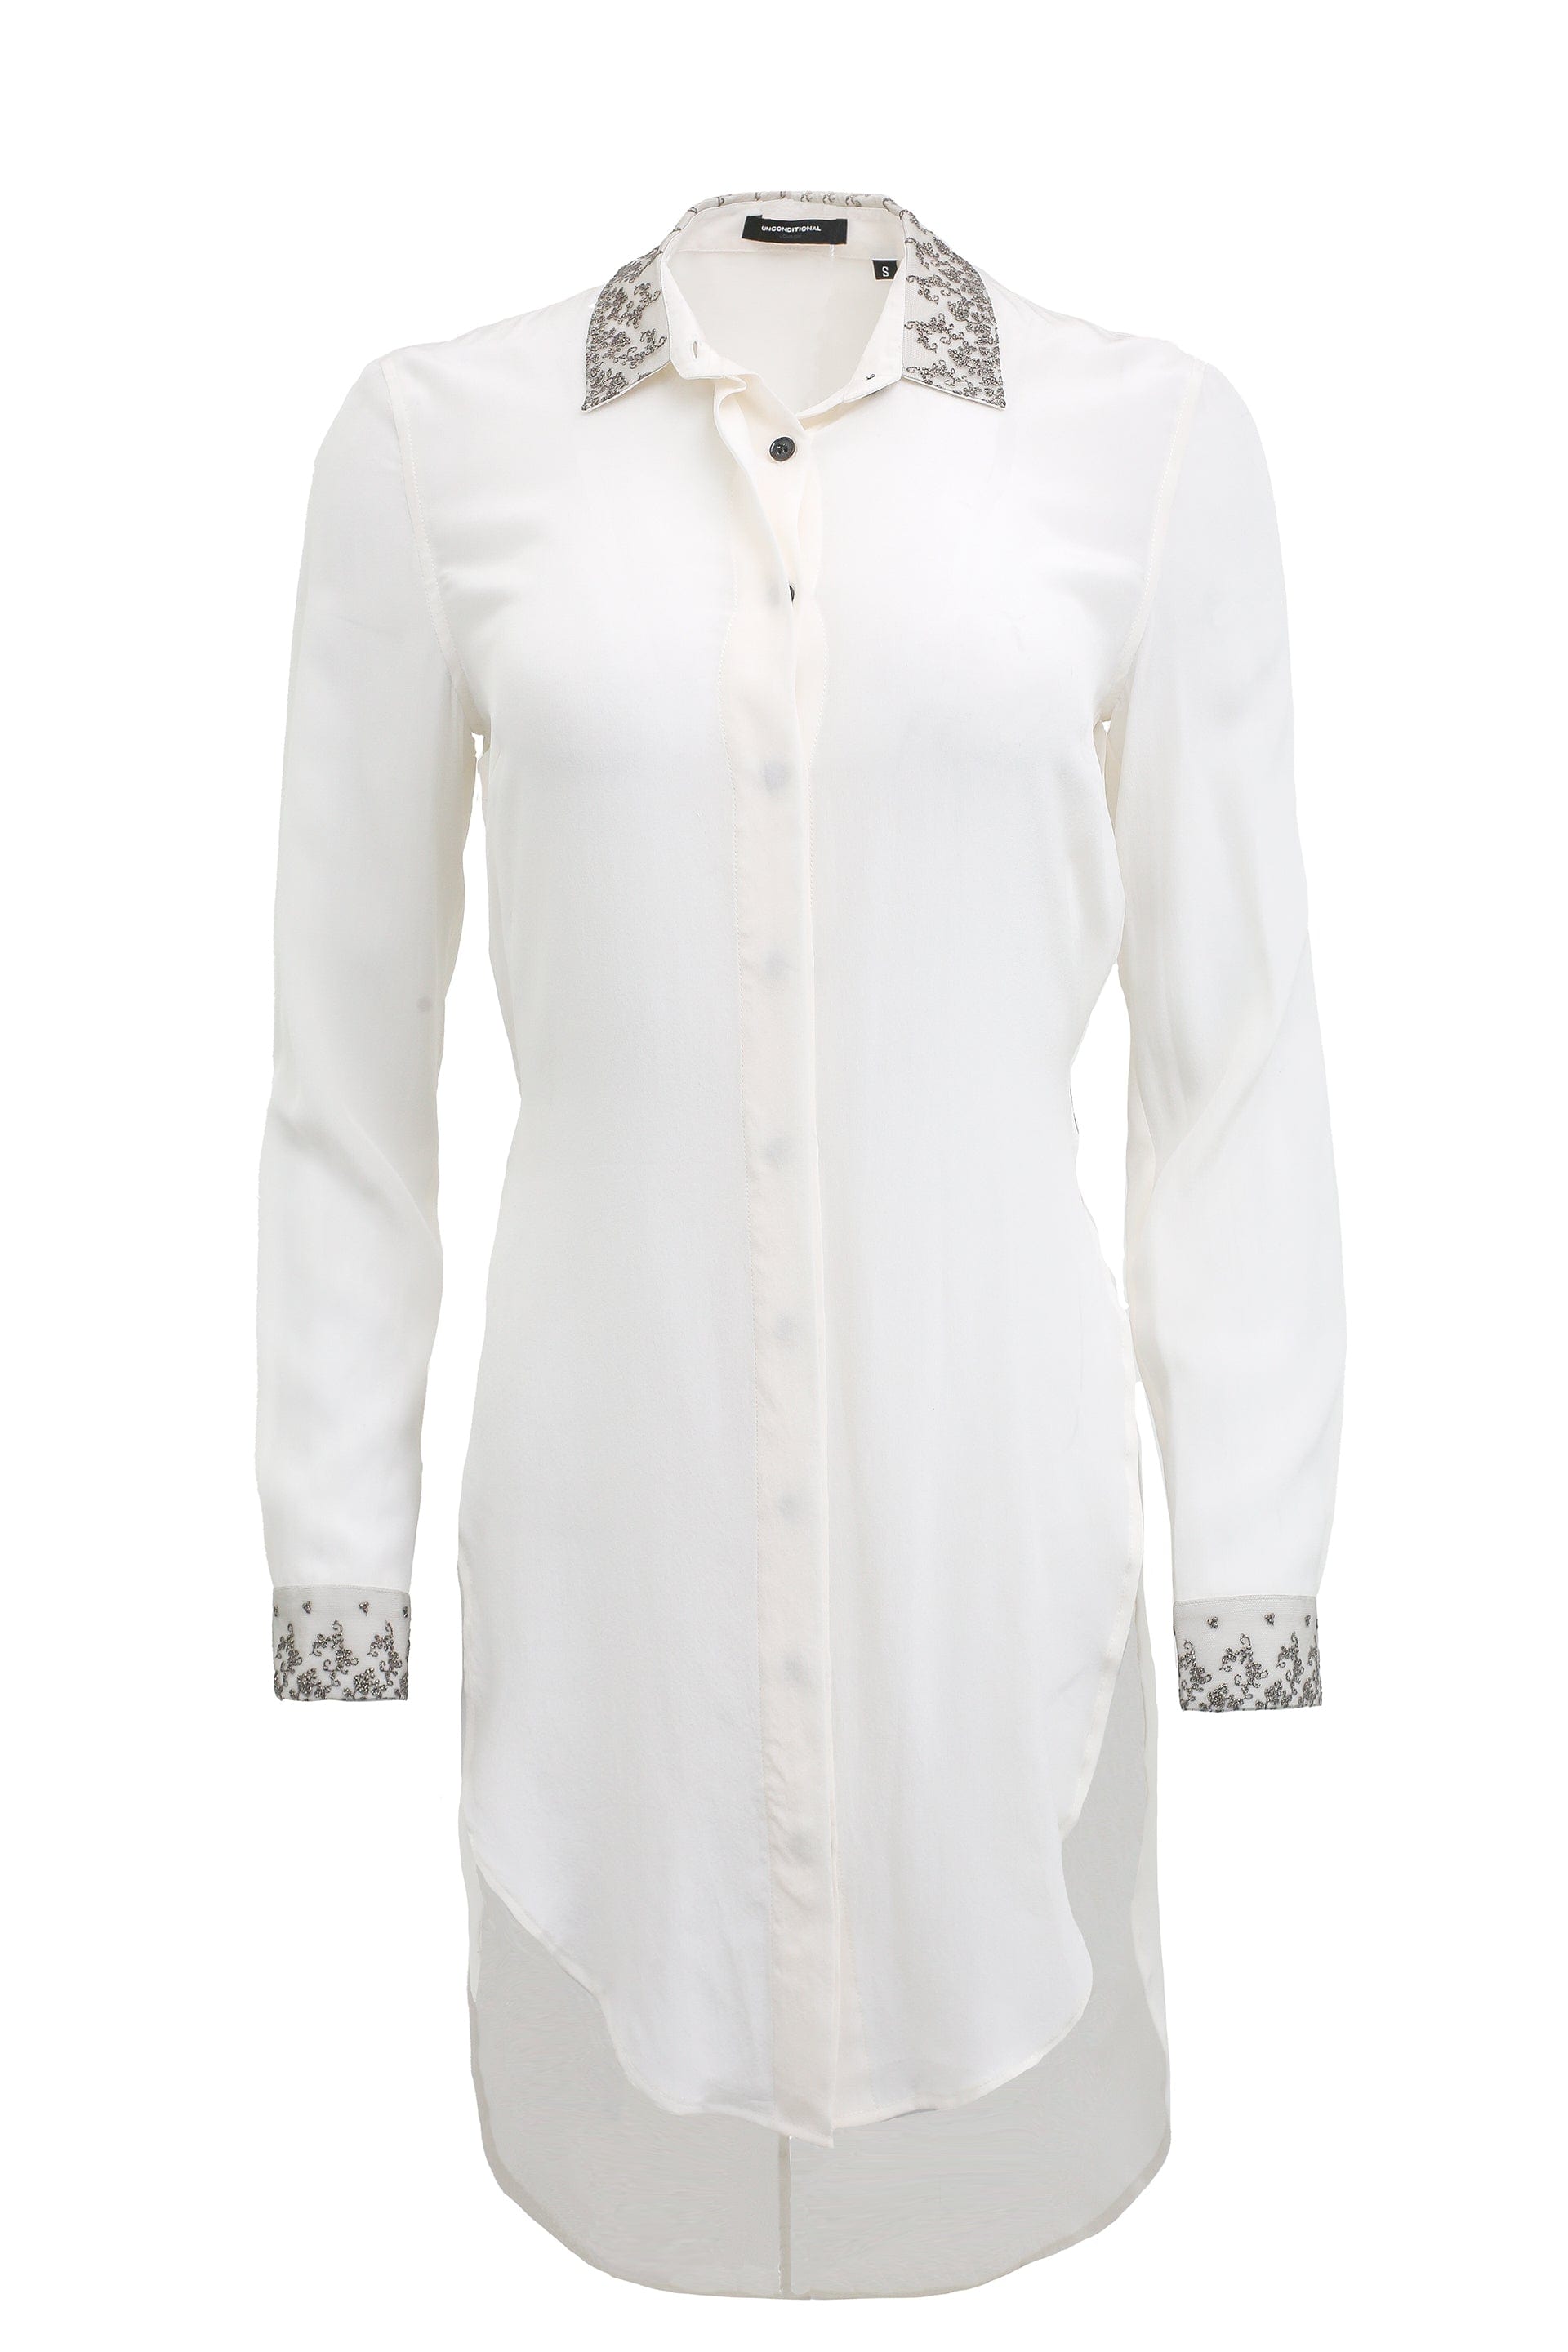 White Long Sleeve Shirt with Lace Details